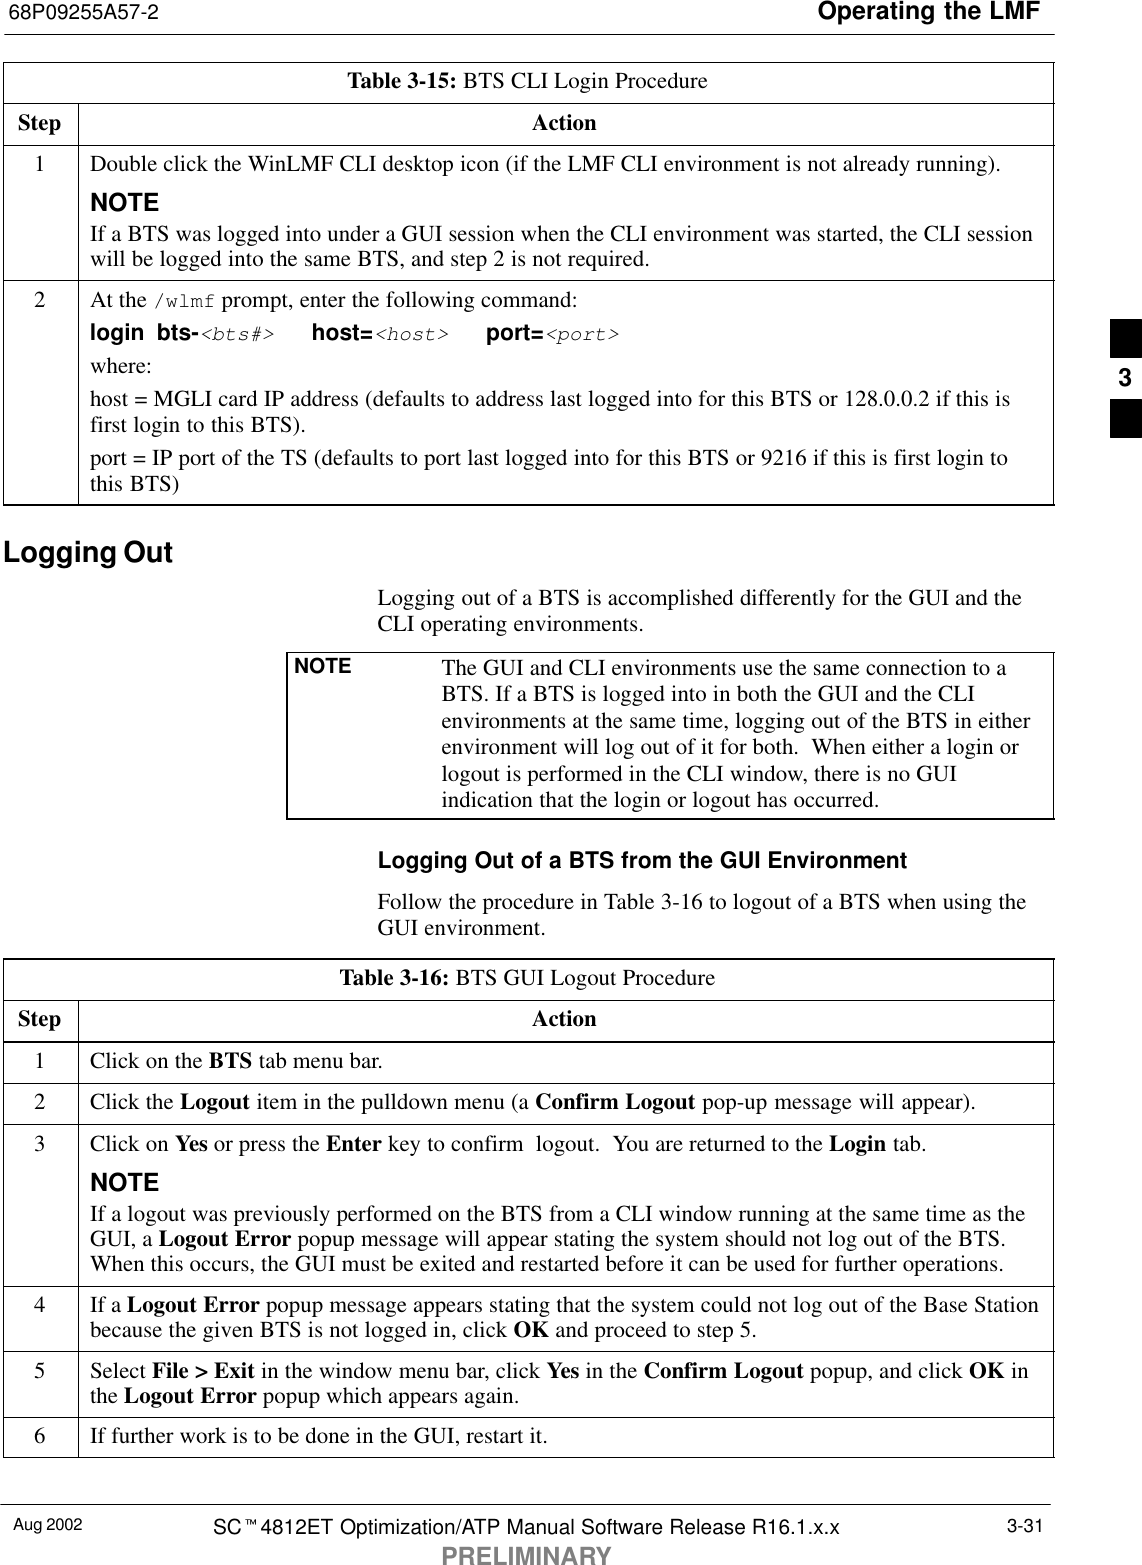 Operating the LMF68P09255A57-2Aug 2002 SCt4812ET Optimization/ATP Manual Software Release R16.1.x.xPRELIMINARY3-31Table 3-15: BTS CLI Login ProcedureStep Action1Double click the WinLMF CLI desktop icon (if the LMF CLI environment is not already running).NOTEIf a BTS was logged into under a GUI session when the CLI environment was started, the CLI sessionwill be logged into the same BTS, and step 2 is not required.2At the /wlmf prompt, enter the following command:login bts-&lt;bts#&gt;   host=&lt;host&gt;   port=&lt;port&gt;where:host = MGLI card IP address (defaults to address last logged into for this BTS or 128.0.0.2 if this isfirst login to this BTS).port = IP port of the TS (defaults to port last logged into for this BTS or 9216 if this is first login tothis BTS)Logging OutLogging out of a BTS is accomplished differently for the GUI and theCLI operating environments.NOTE The GUI and CLI environments use the same connection to aBTS. If a BTS is logged into in both the GUI and the CLIenvironments at the same time, logging out of the BTS in eitherenvironment will log out of it for both.  When either a login orlogout is performed in the CLI window, there is no GUIindication that the login or logout has occurred.Logging Out of a BTS from the GUI EnvironmentFollow the procedure in Table 3-16 to logout of a BTS when using theGUI environment.Table 3-16: BTS GUI Logout ProcedureStep Action1Click on the BTS tab menu bar.2Click the Logout item in the pulldown menu (a Confirm Logout pop-up message will appear).3Click on Yes or press the Enter key to confirm  logout.  You are returned to the Login tab.NOTEIf a logout was previously performed on the BTS from a CLI window running at the same time as theGUI, a Logout Error popup message will appear stating the system should not log out of the BTS.When this occurs, the GUI must be exited and restarted before it can be used for further operations.4If a Logout Error popup message appears stating that the system could not log out of the Base Stationbecause the given BTS is not logged in, click OK and proceed to step 5.5 Select File &gt; Exit in the window menu bar, click Yes in the Confirm Logout popup, and click OK inthe Logout Error popup which appears again.6If further work is to be done in the GUI, restart it. 3